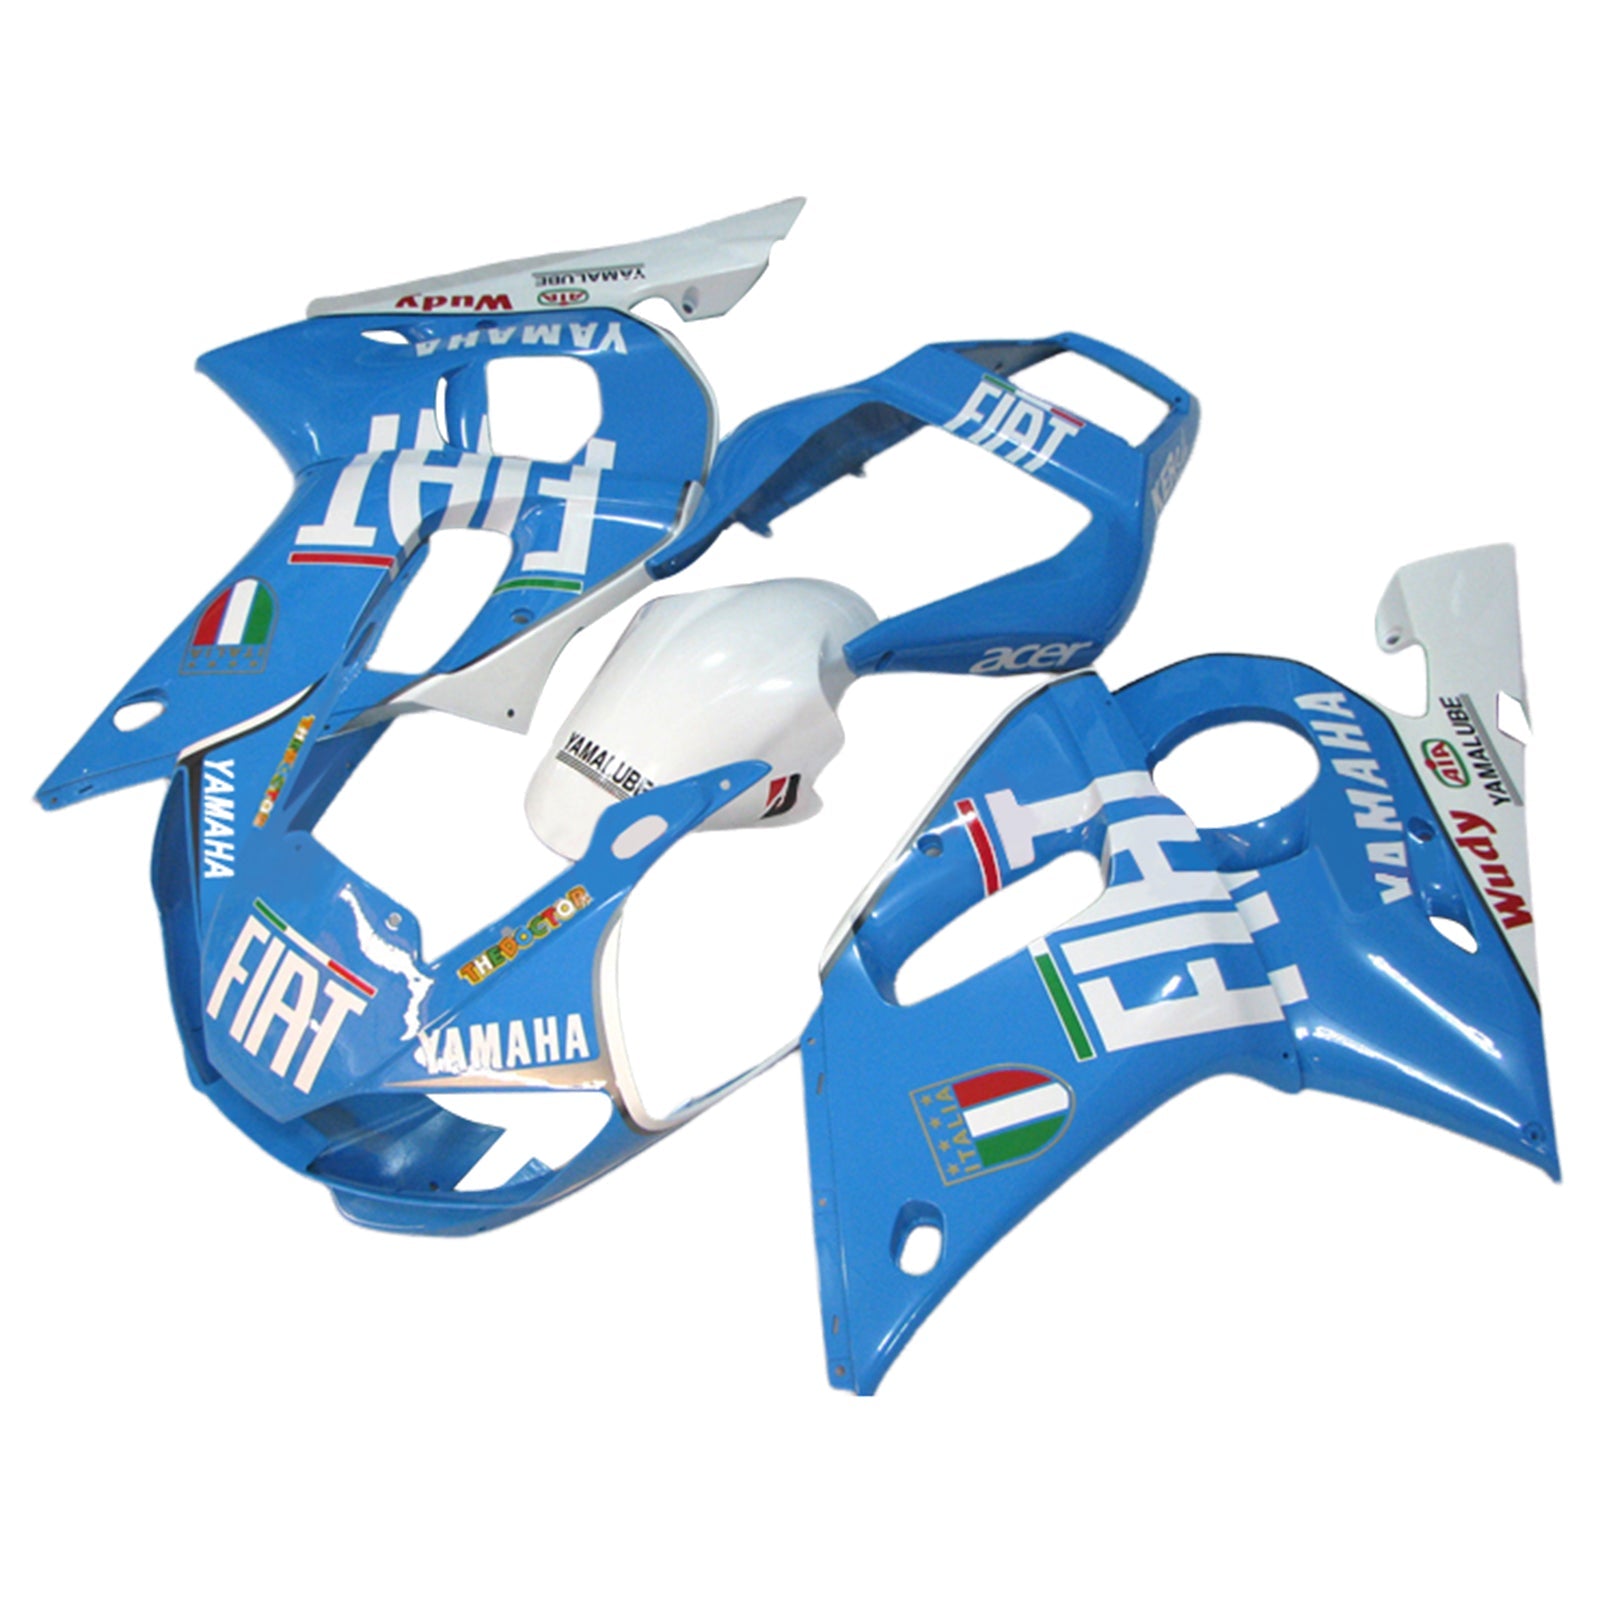 Amotopart Kit carena carrozzeria in plastica ABS per Yamaha YZF 600 R6 1998-2002